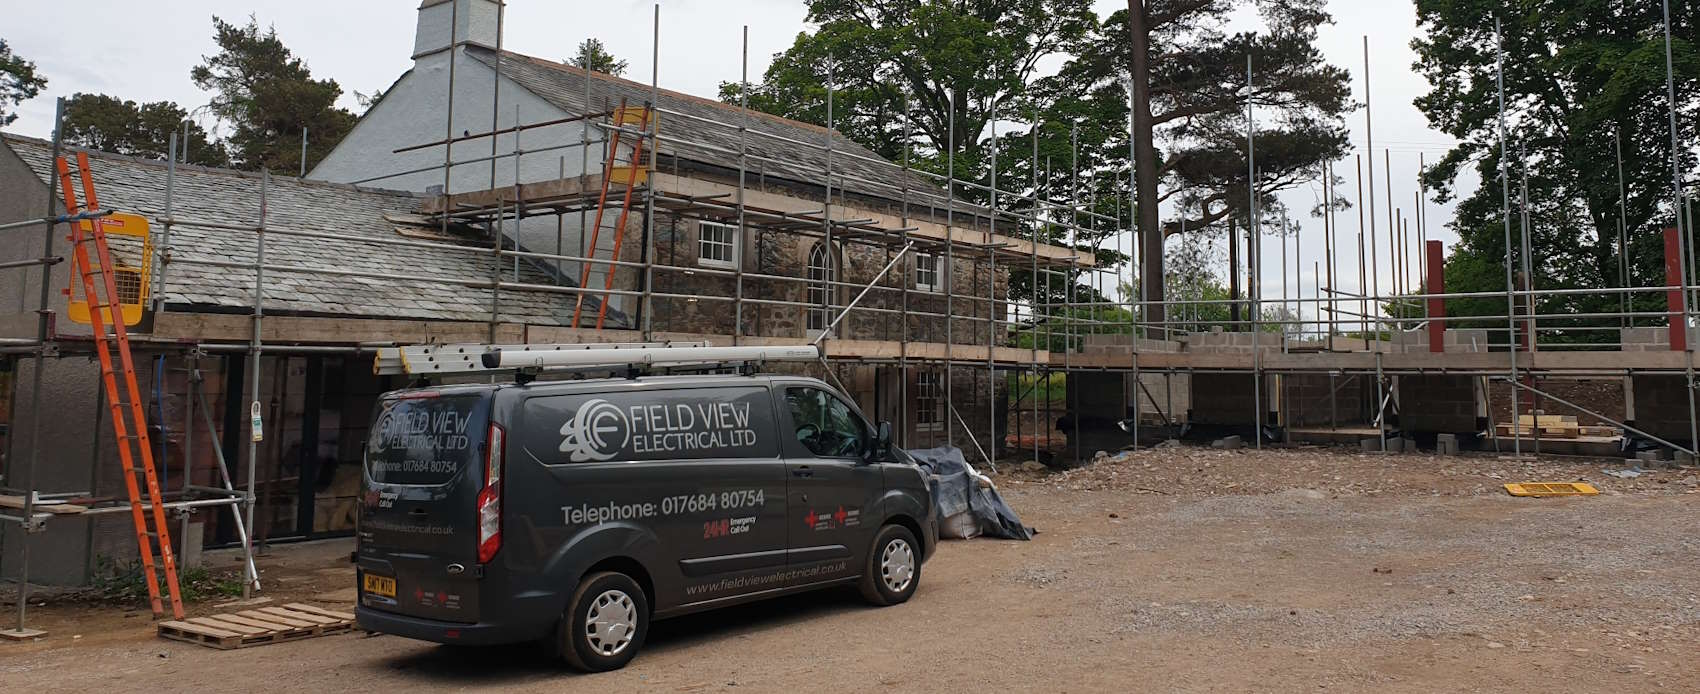 About Field View Electrical Contractors in Penrith, Cumbria